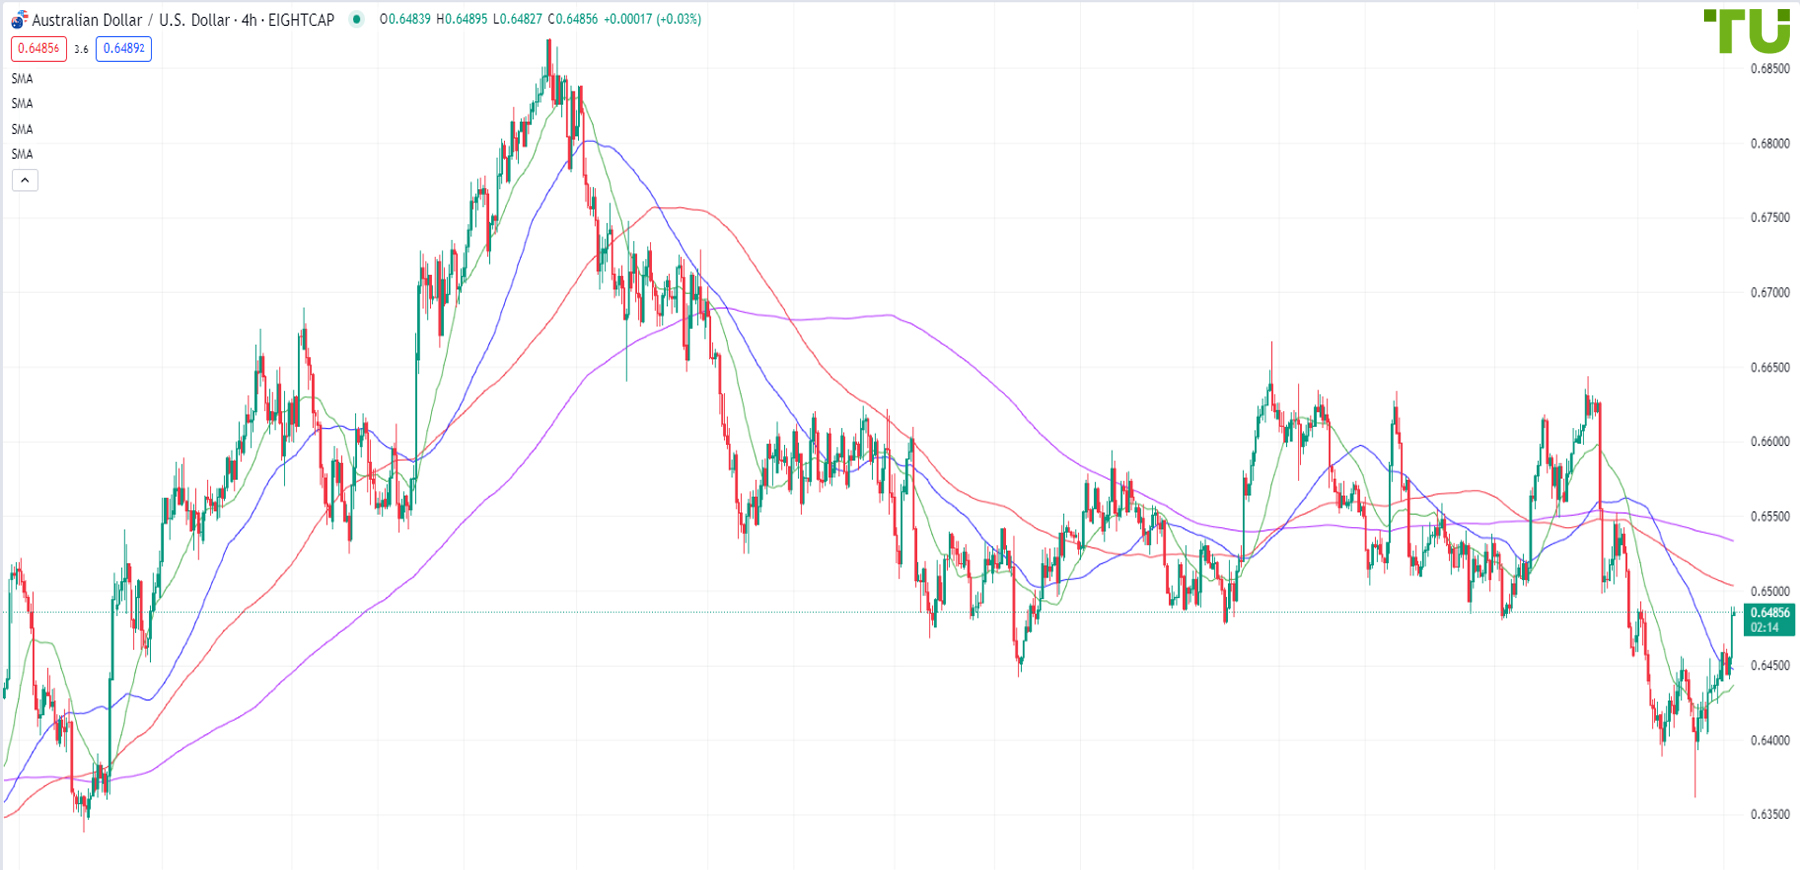 AUD/USD continued to recover